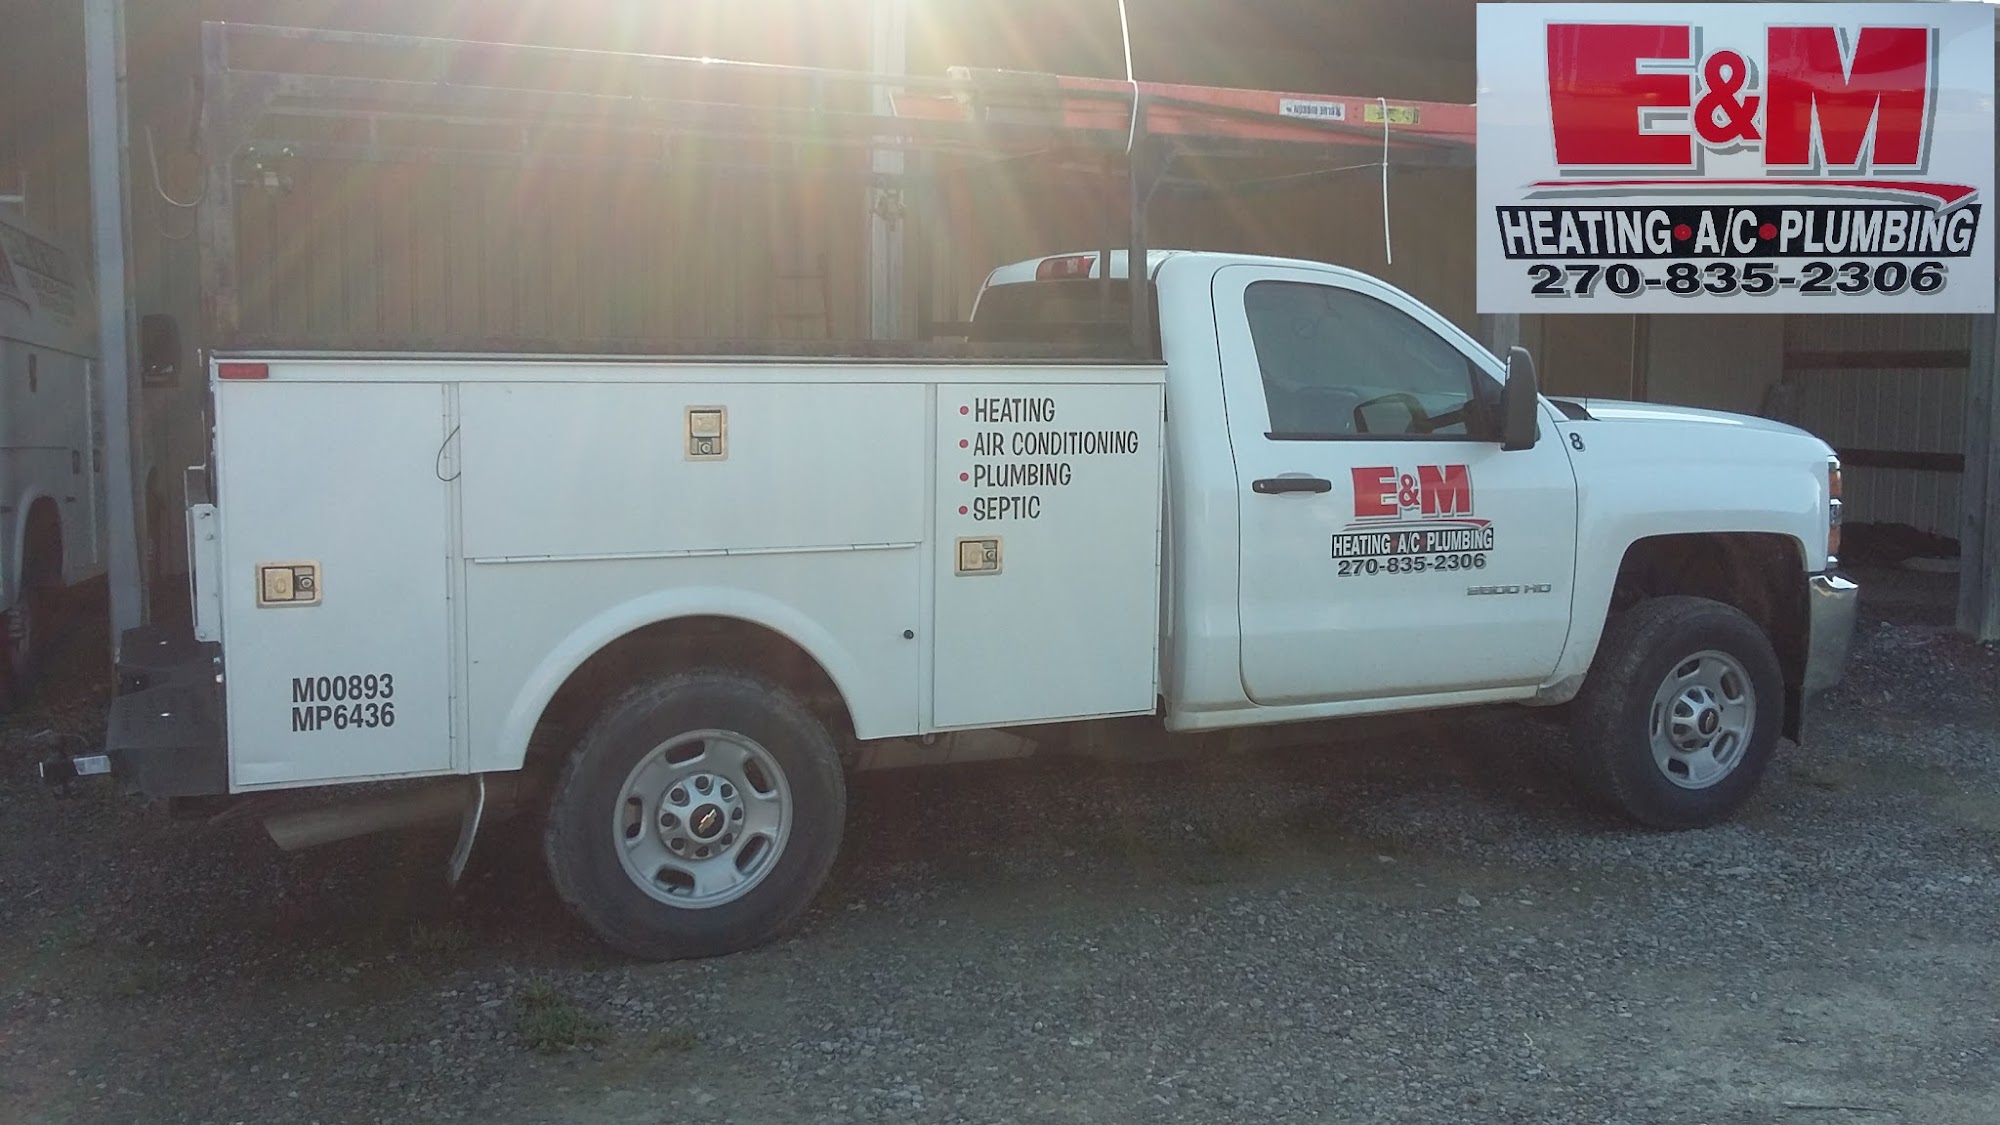 E&M Heating, Plumbing & Air Conditioning